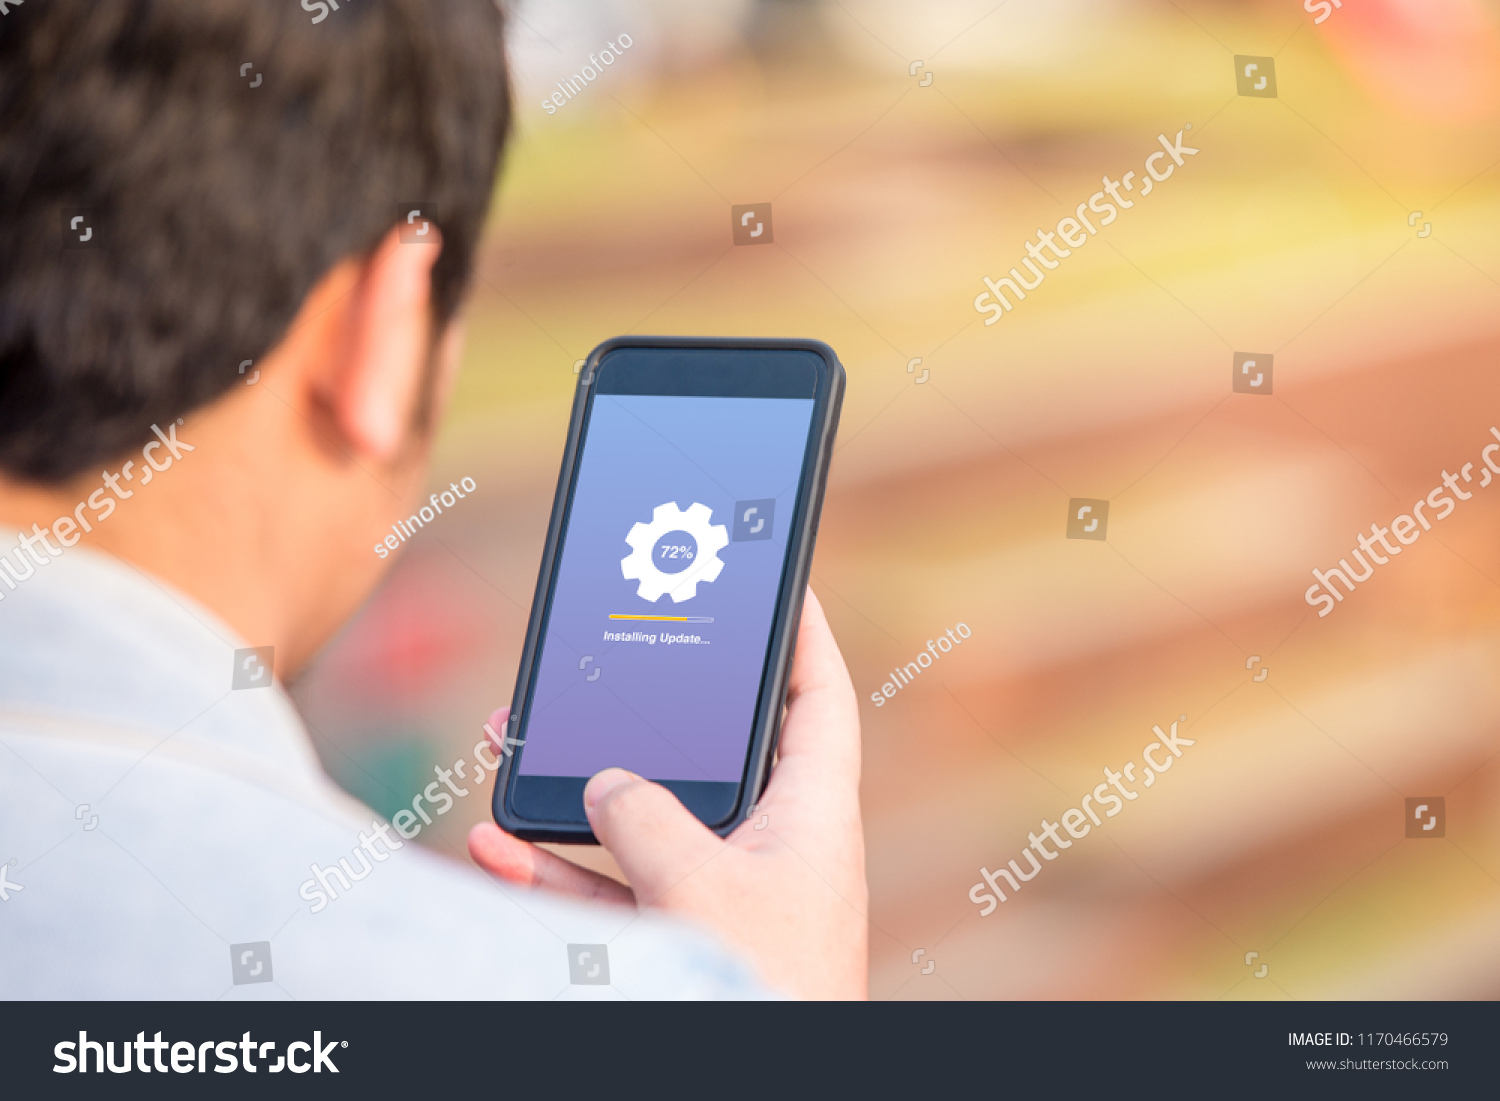 Installing update concept on phone screen. Man holding phone doing installing update process with gearbox percentage progress and loading bar. #1170466579